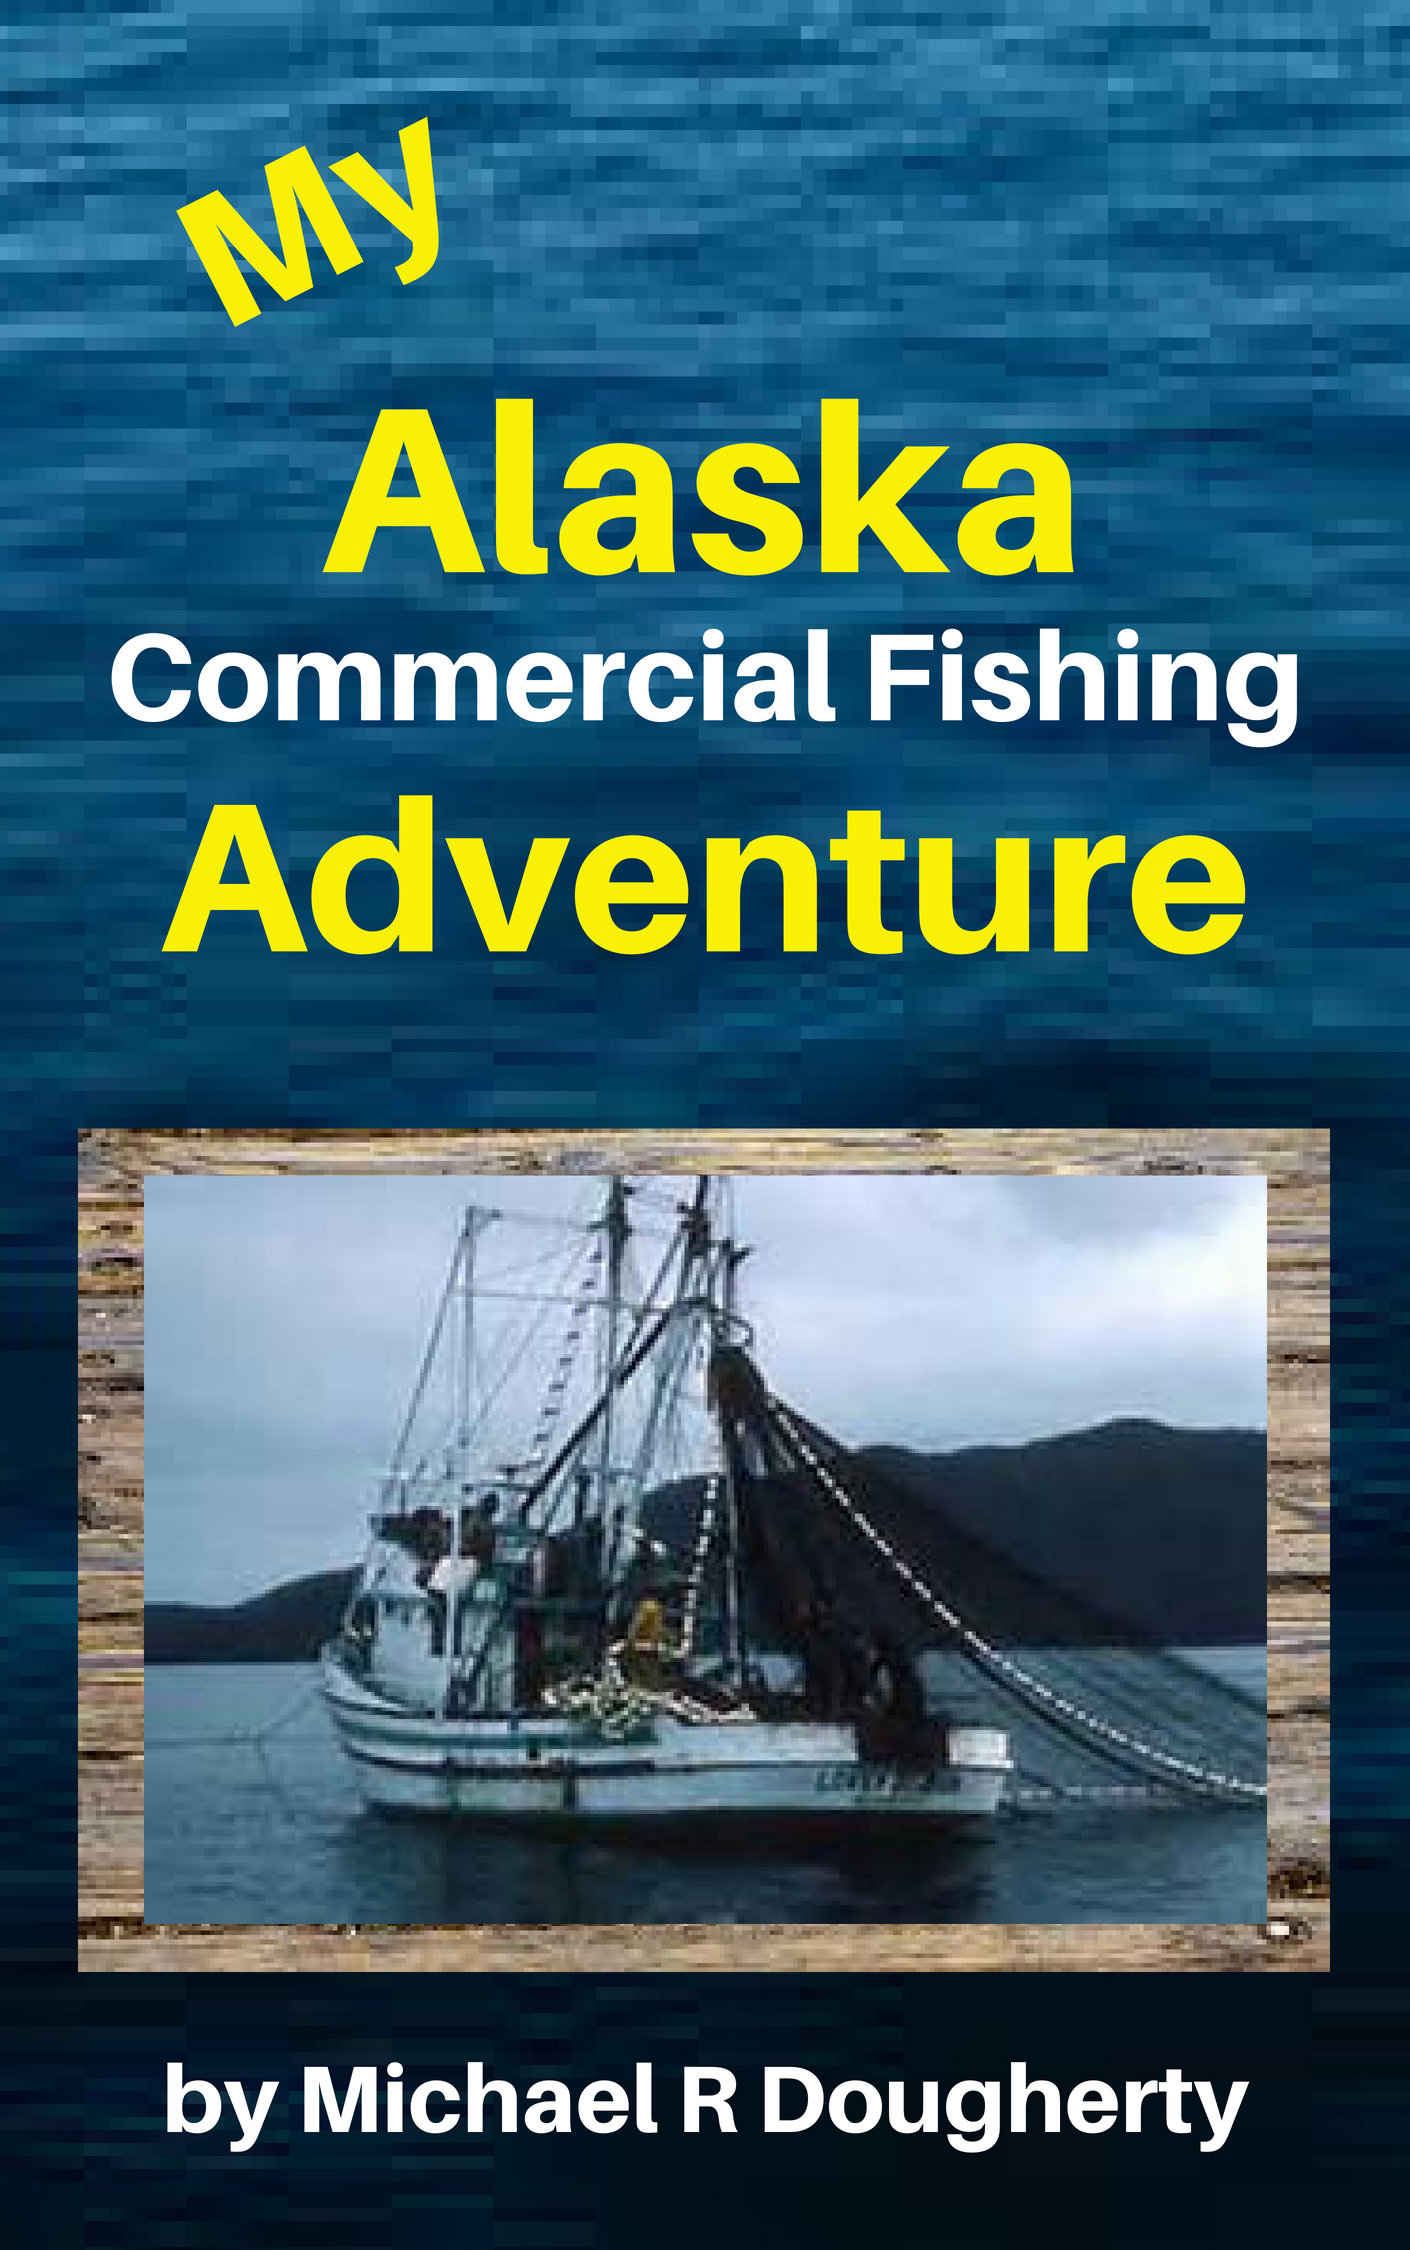 FREE: My Alaska Commercial Fishing Adventure by Michael R Dougherty